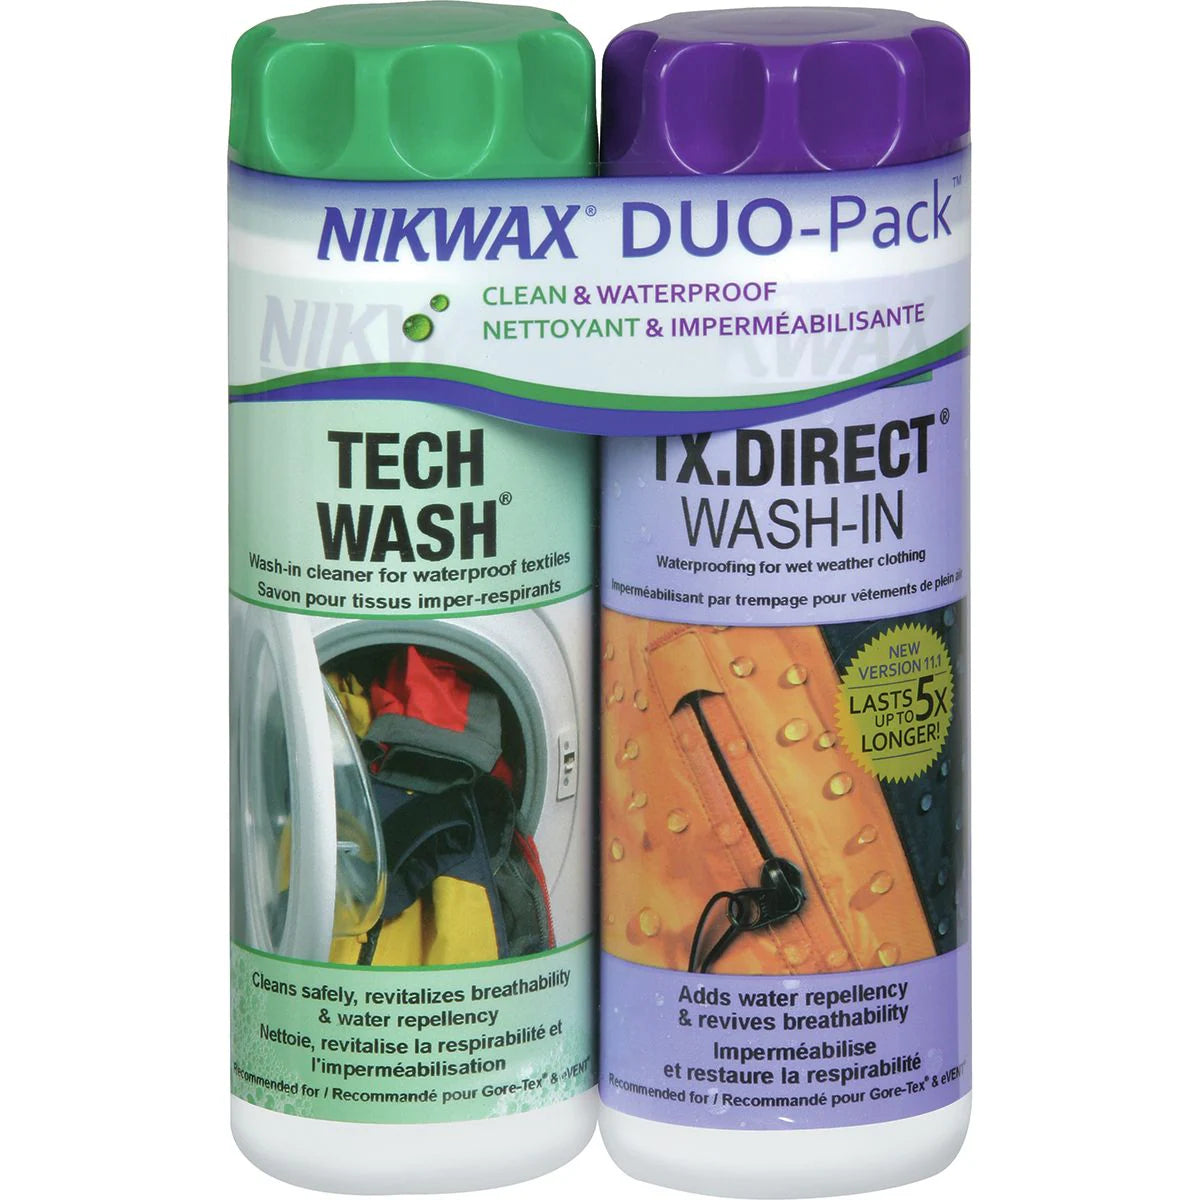 Tech Wash and TX Direct Wash-In Duo-Pack - 300mL